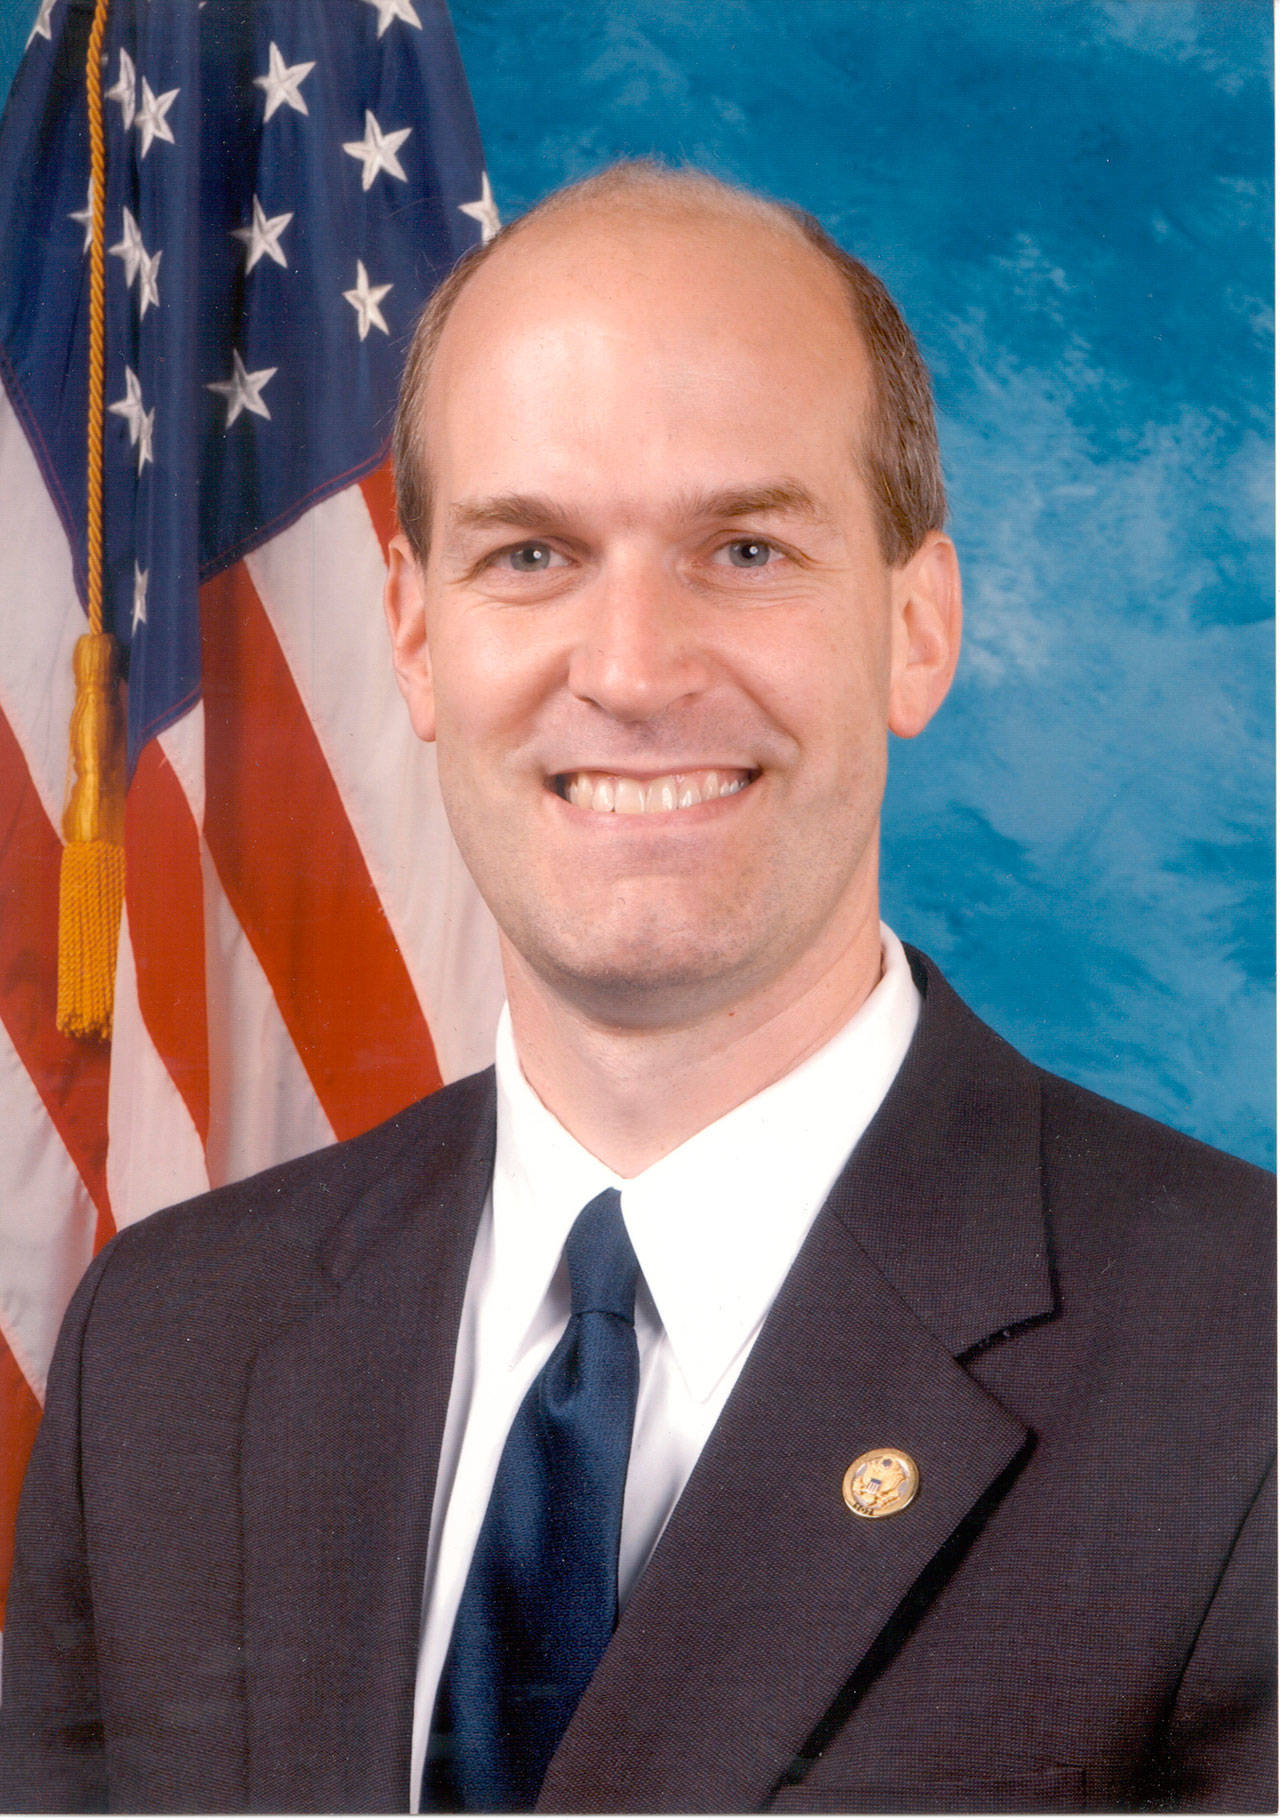 Never too soon to prevent gun violence | Guest Column by Rep. Rick Larsen